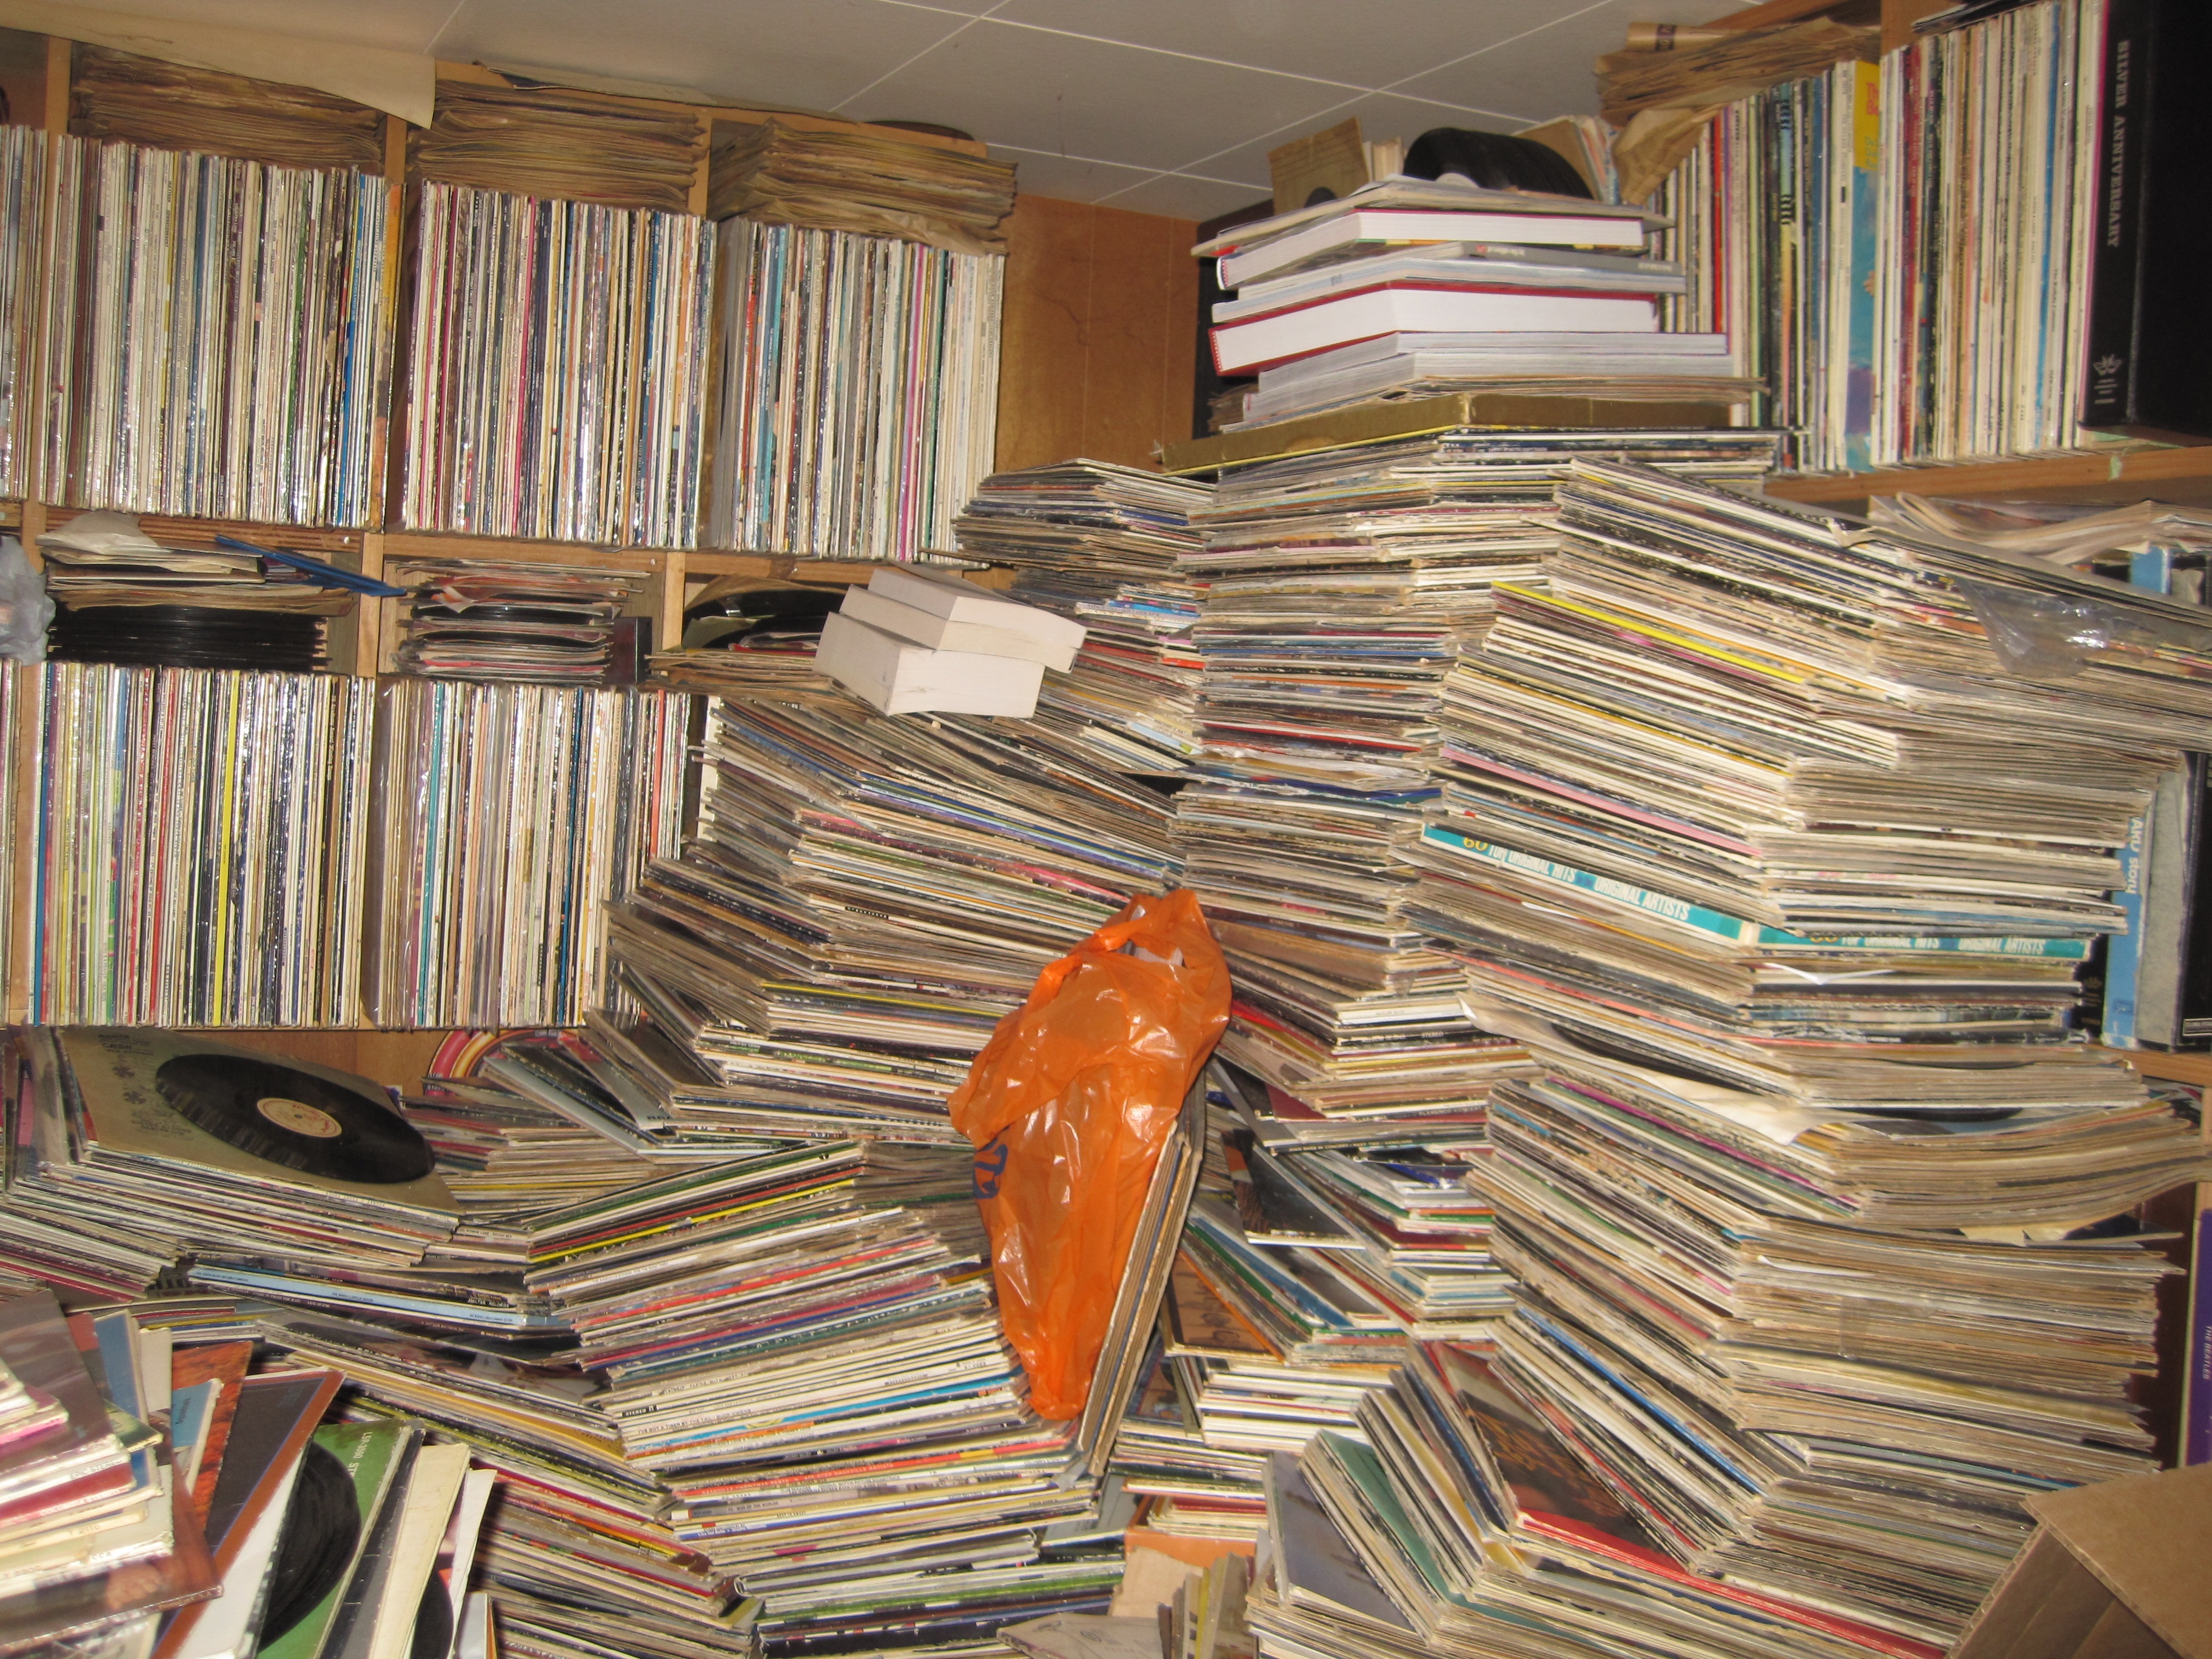 http://ajournalofmusicalthings.com/wp-content/uploads/Record-collection-hoard.jpg